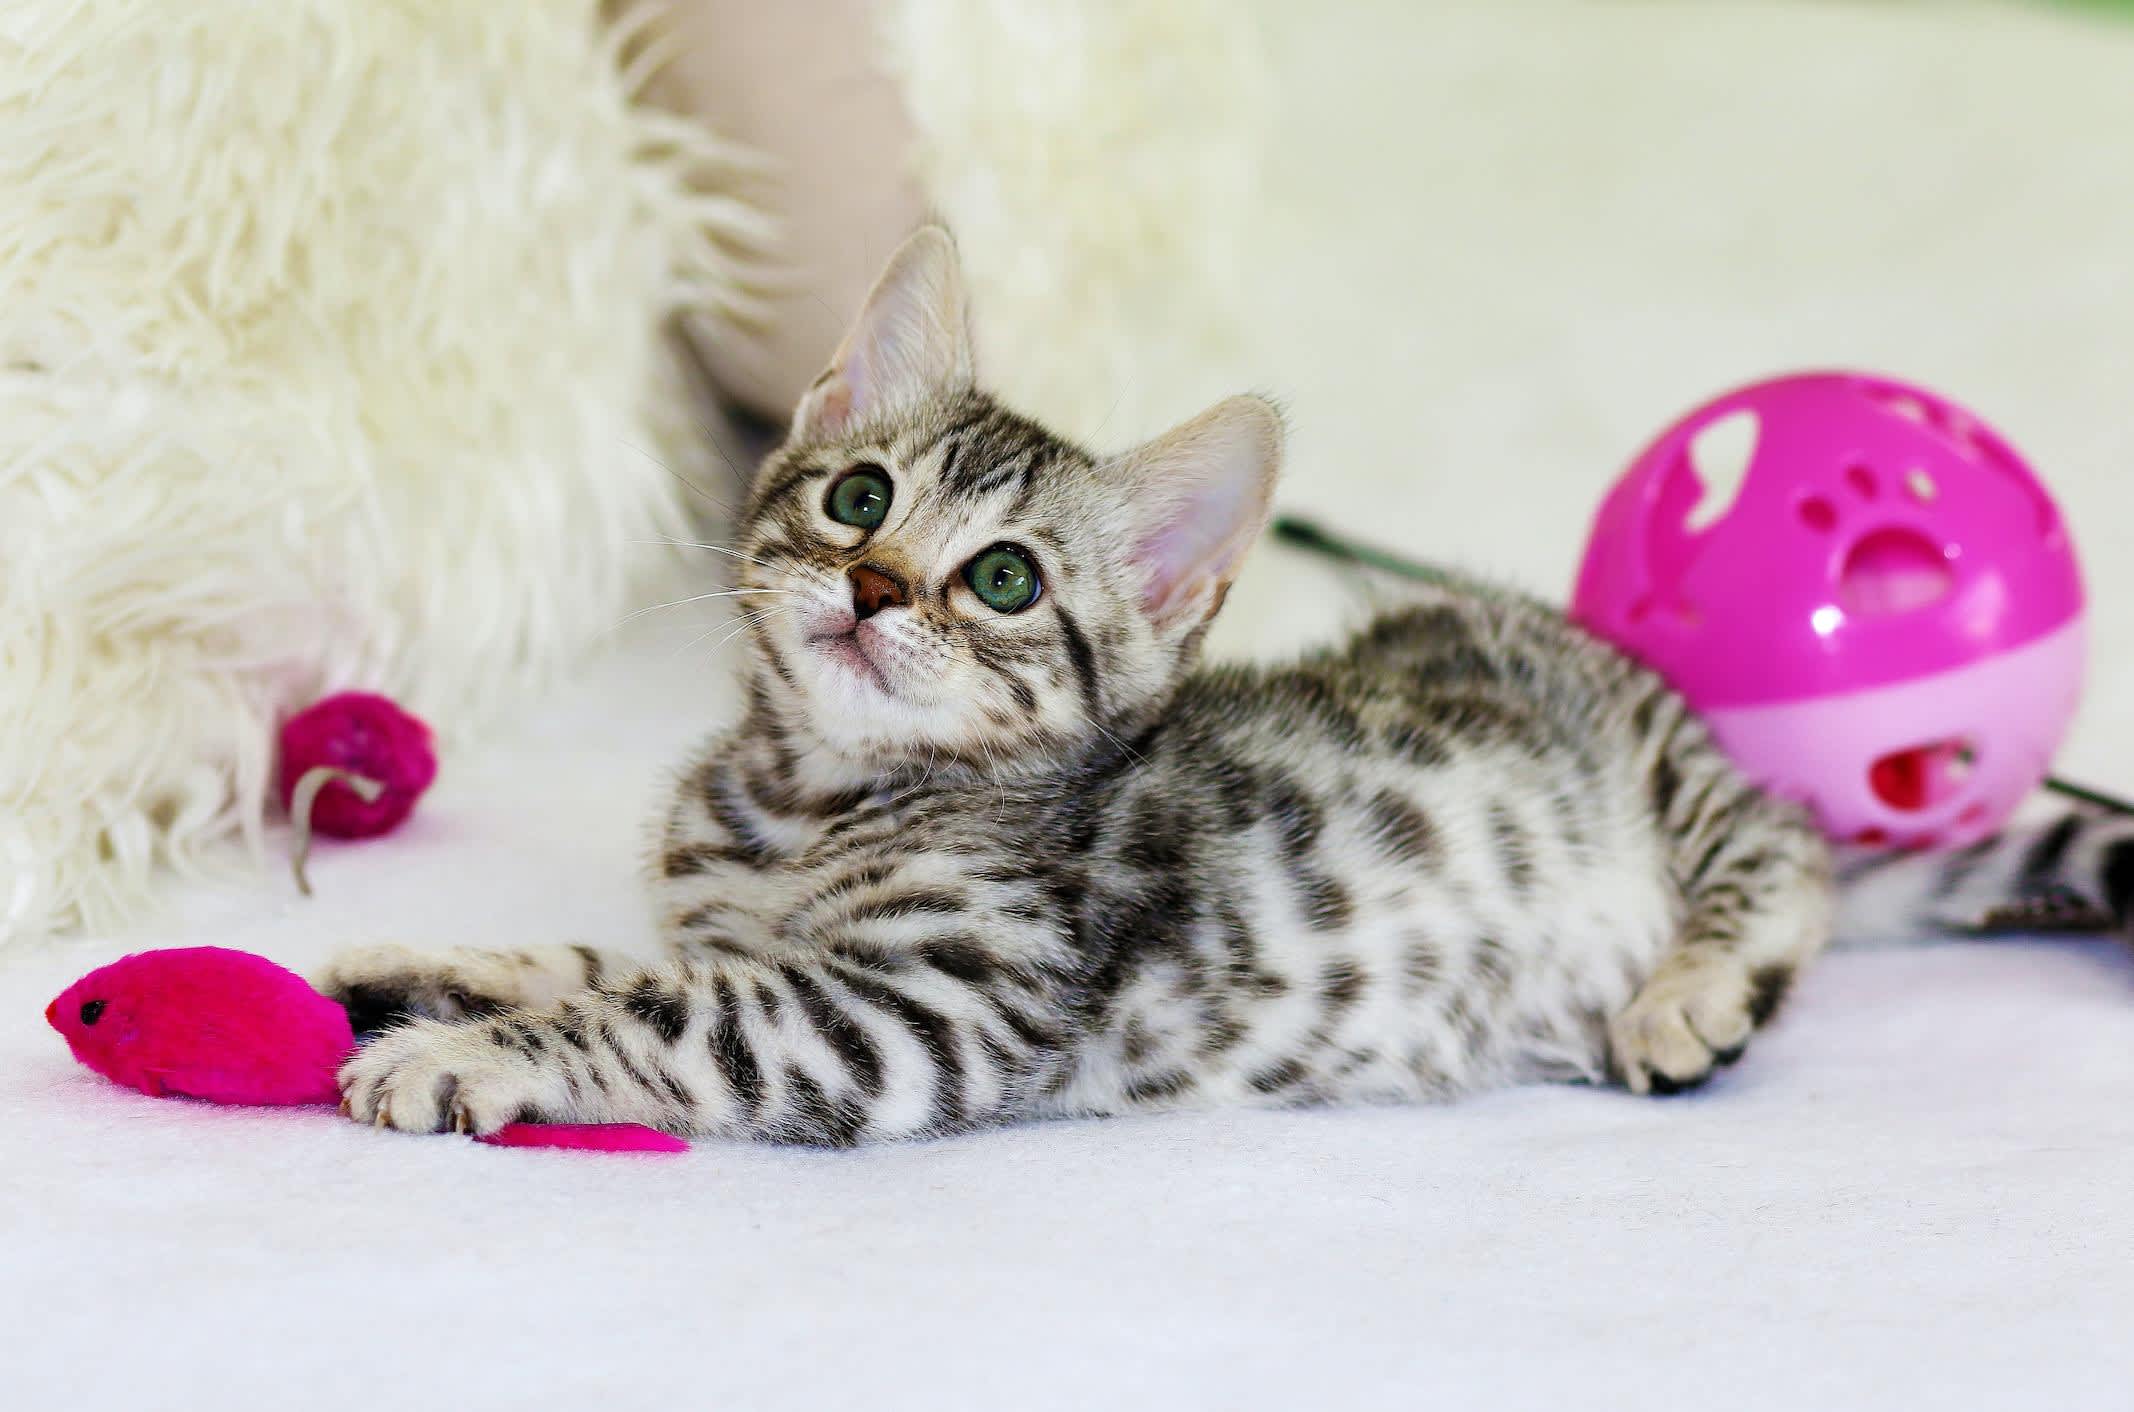 A kitten with various cat toys